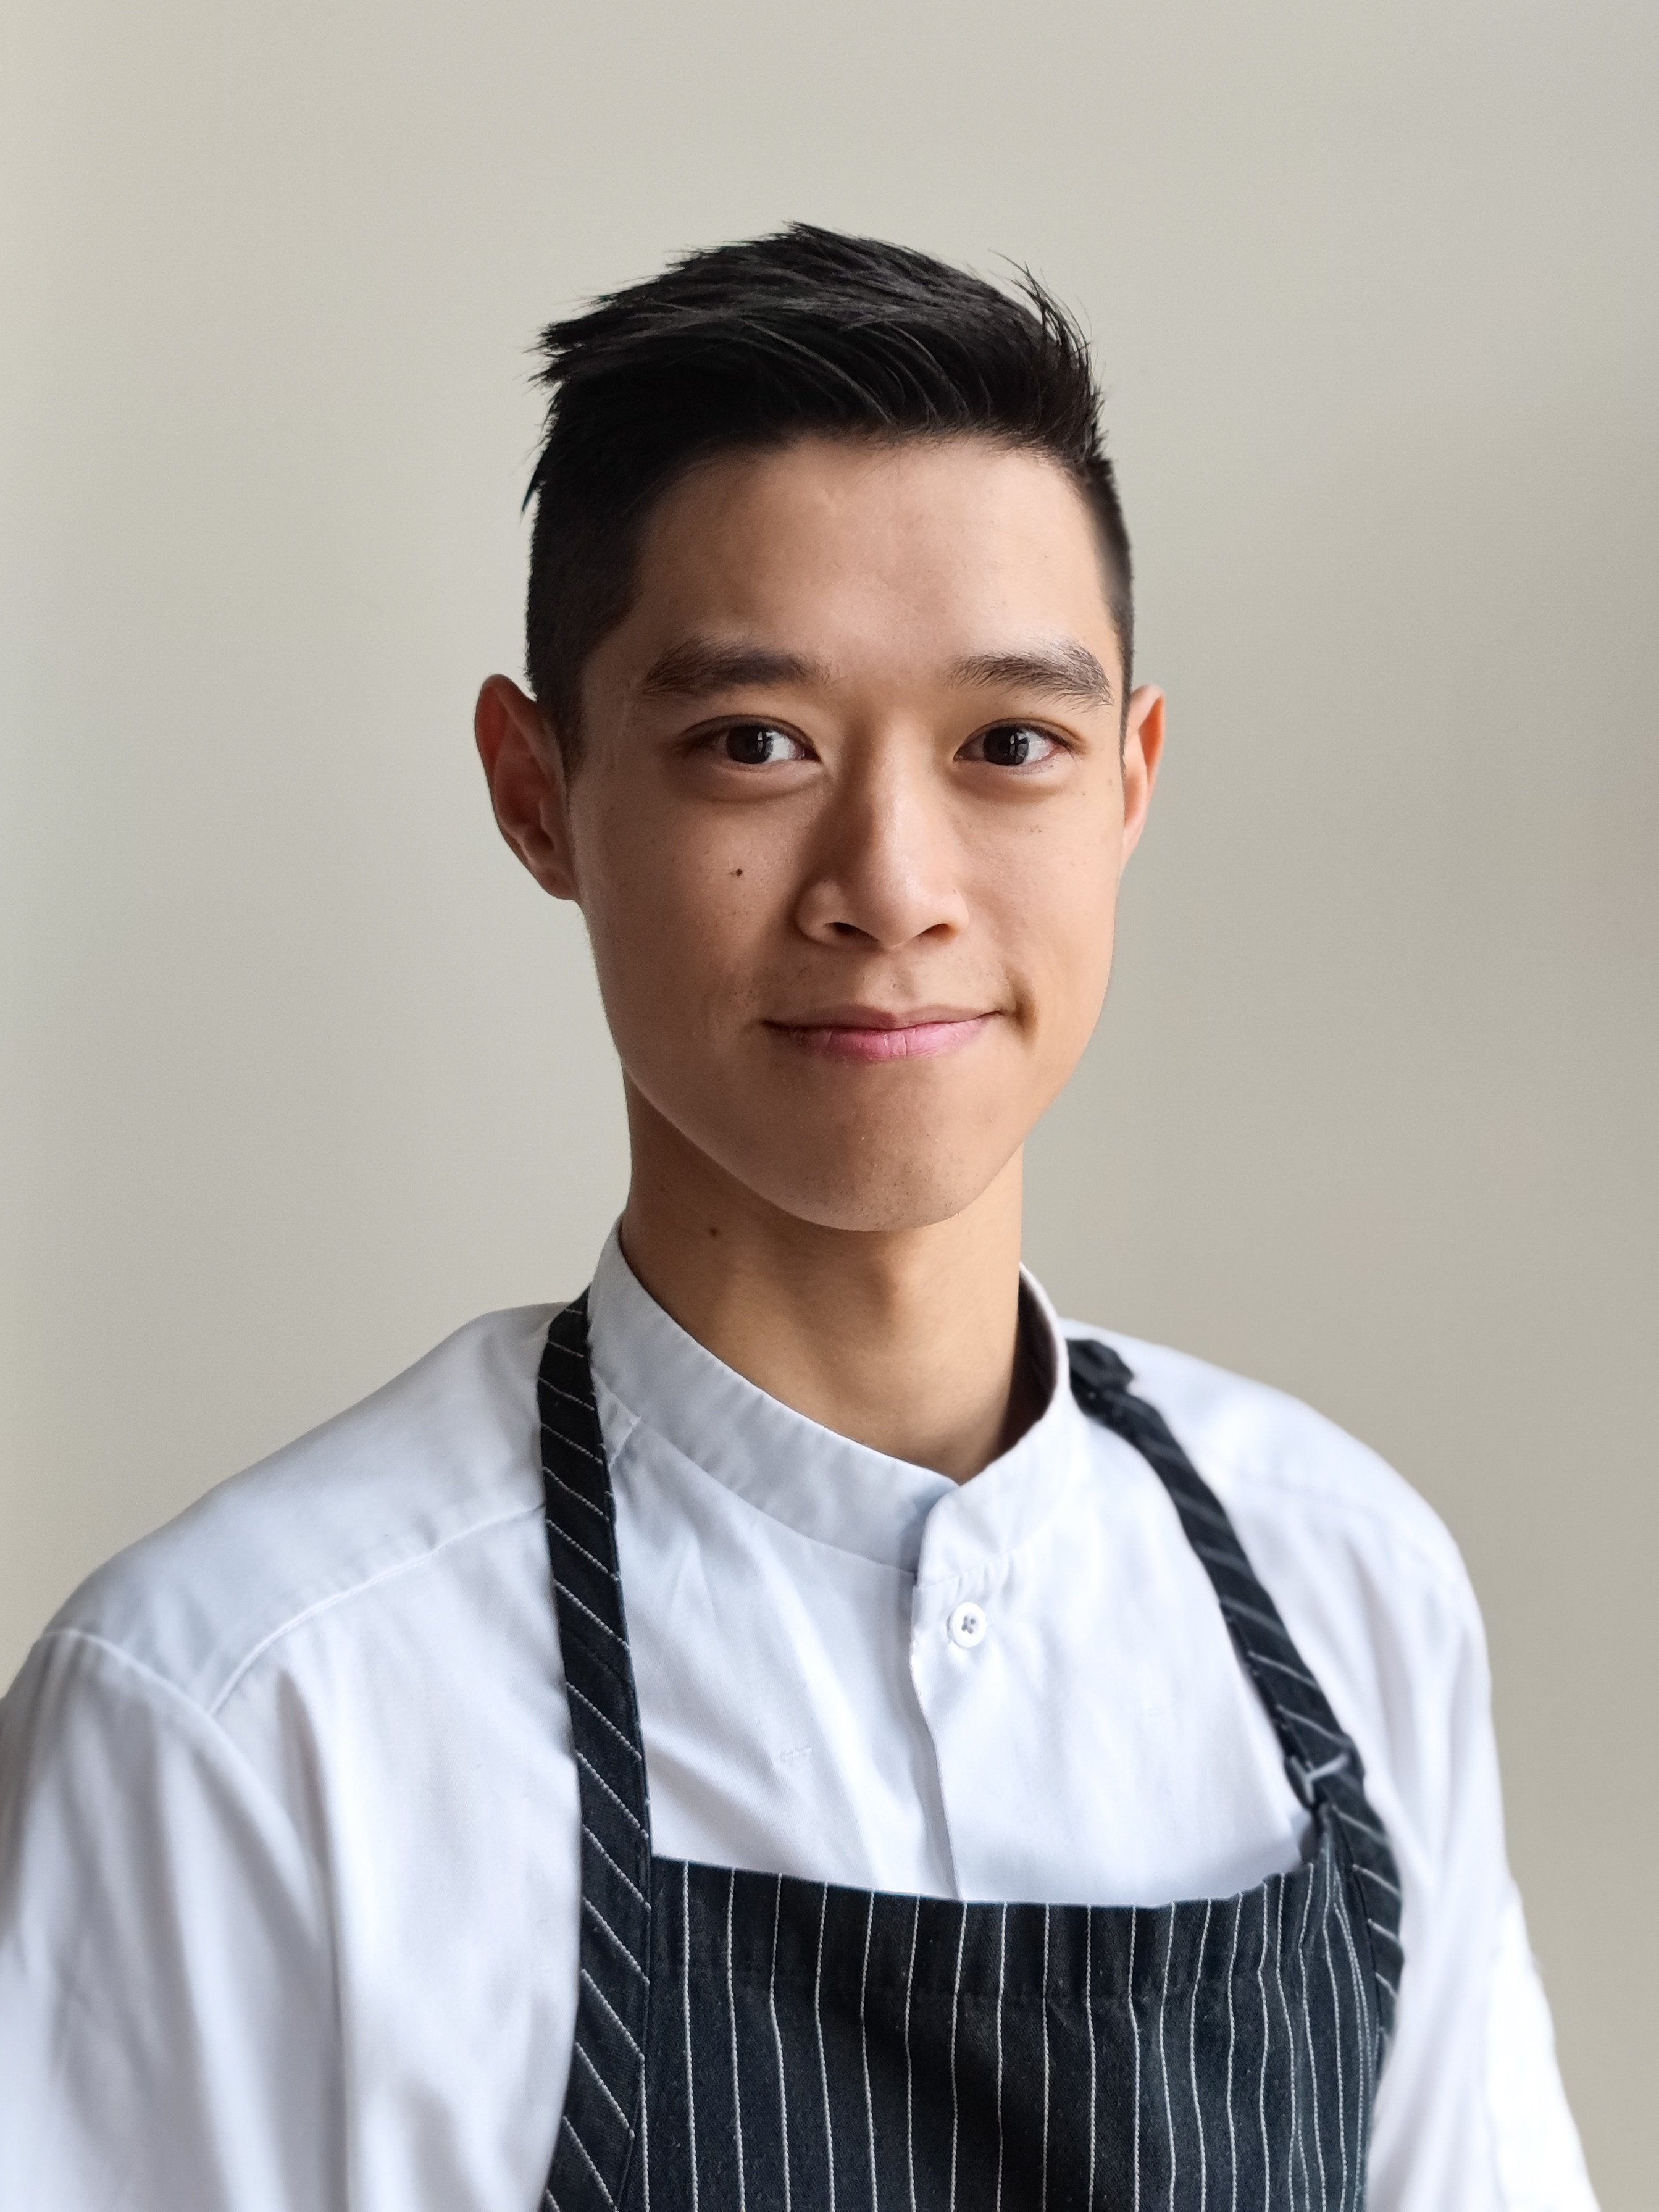 Steven Che is one to watch on Vancouver’s dining scene. The Chinese-Canadian chef opens up about his culinary journey so far, his inspirations, and why he’s rooted in the Canadian city he grew up in. Photo: Steven Che